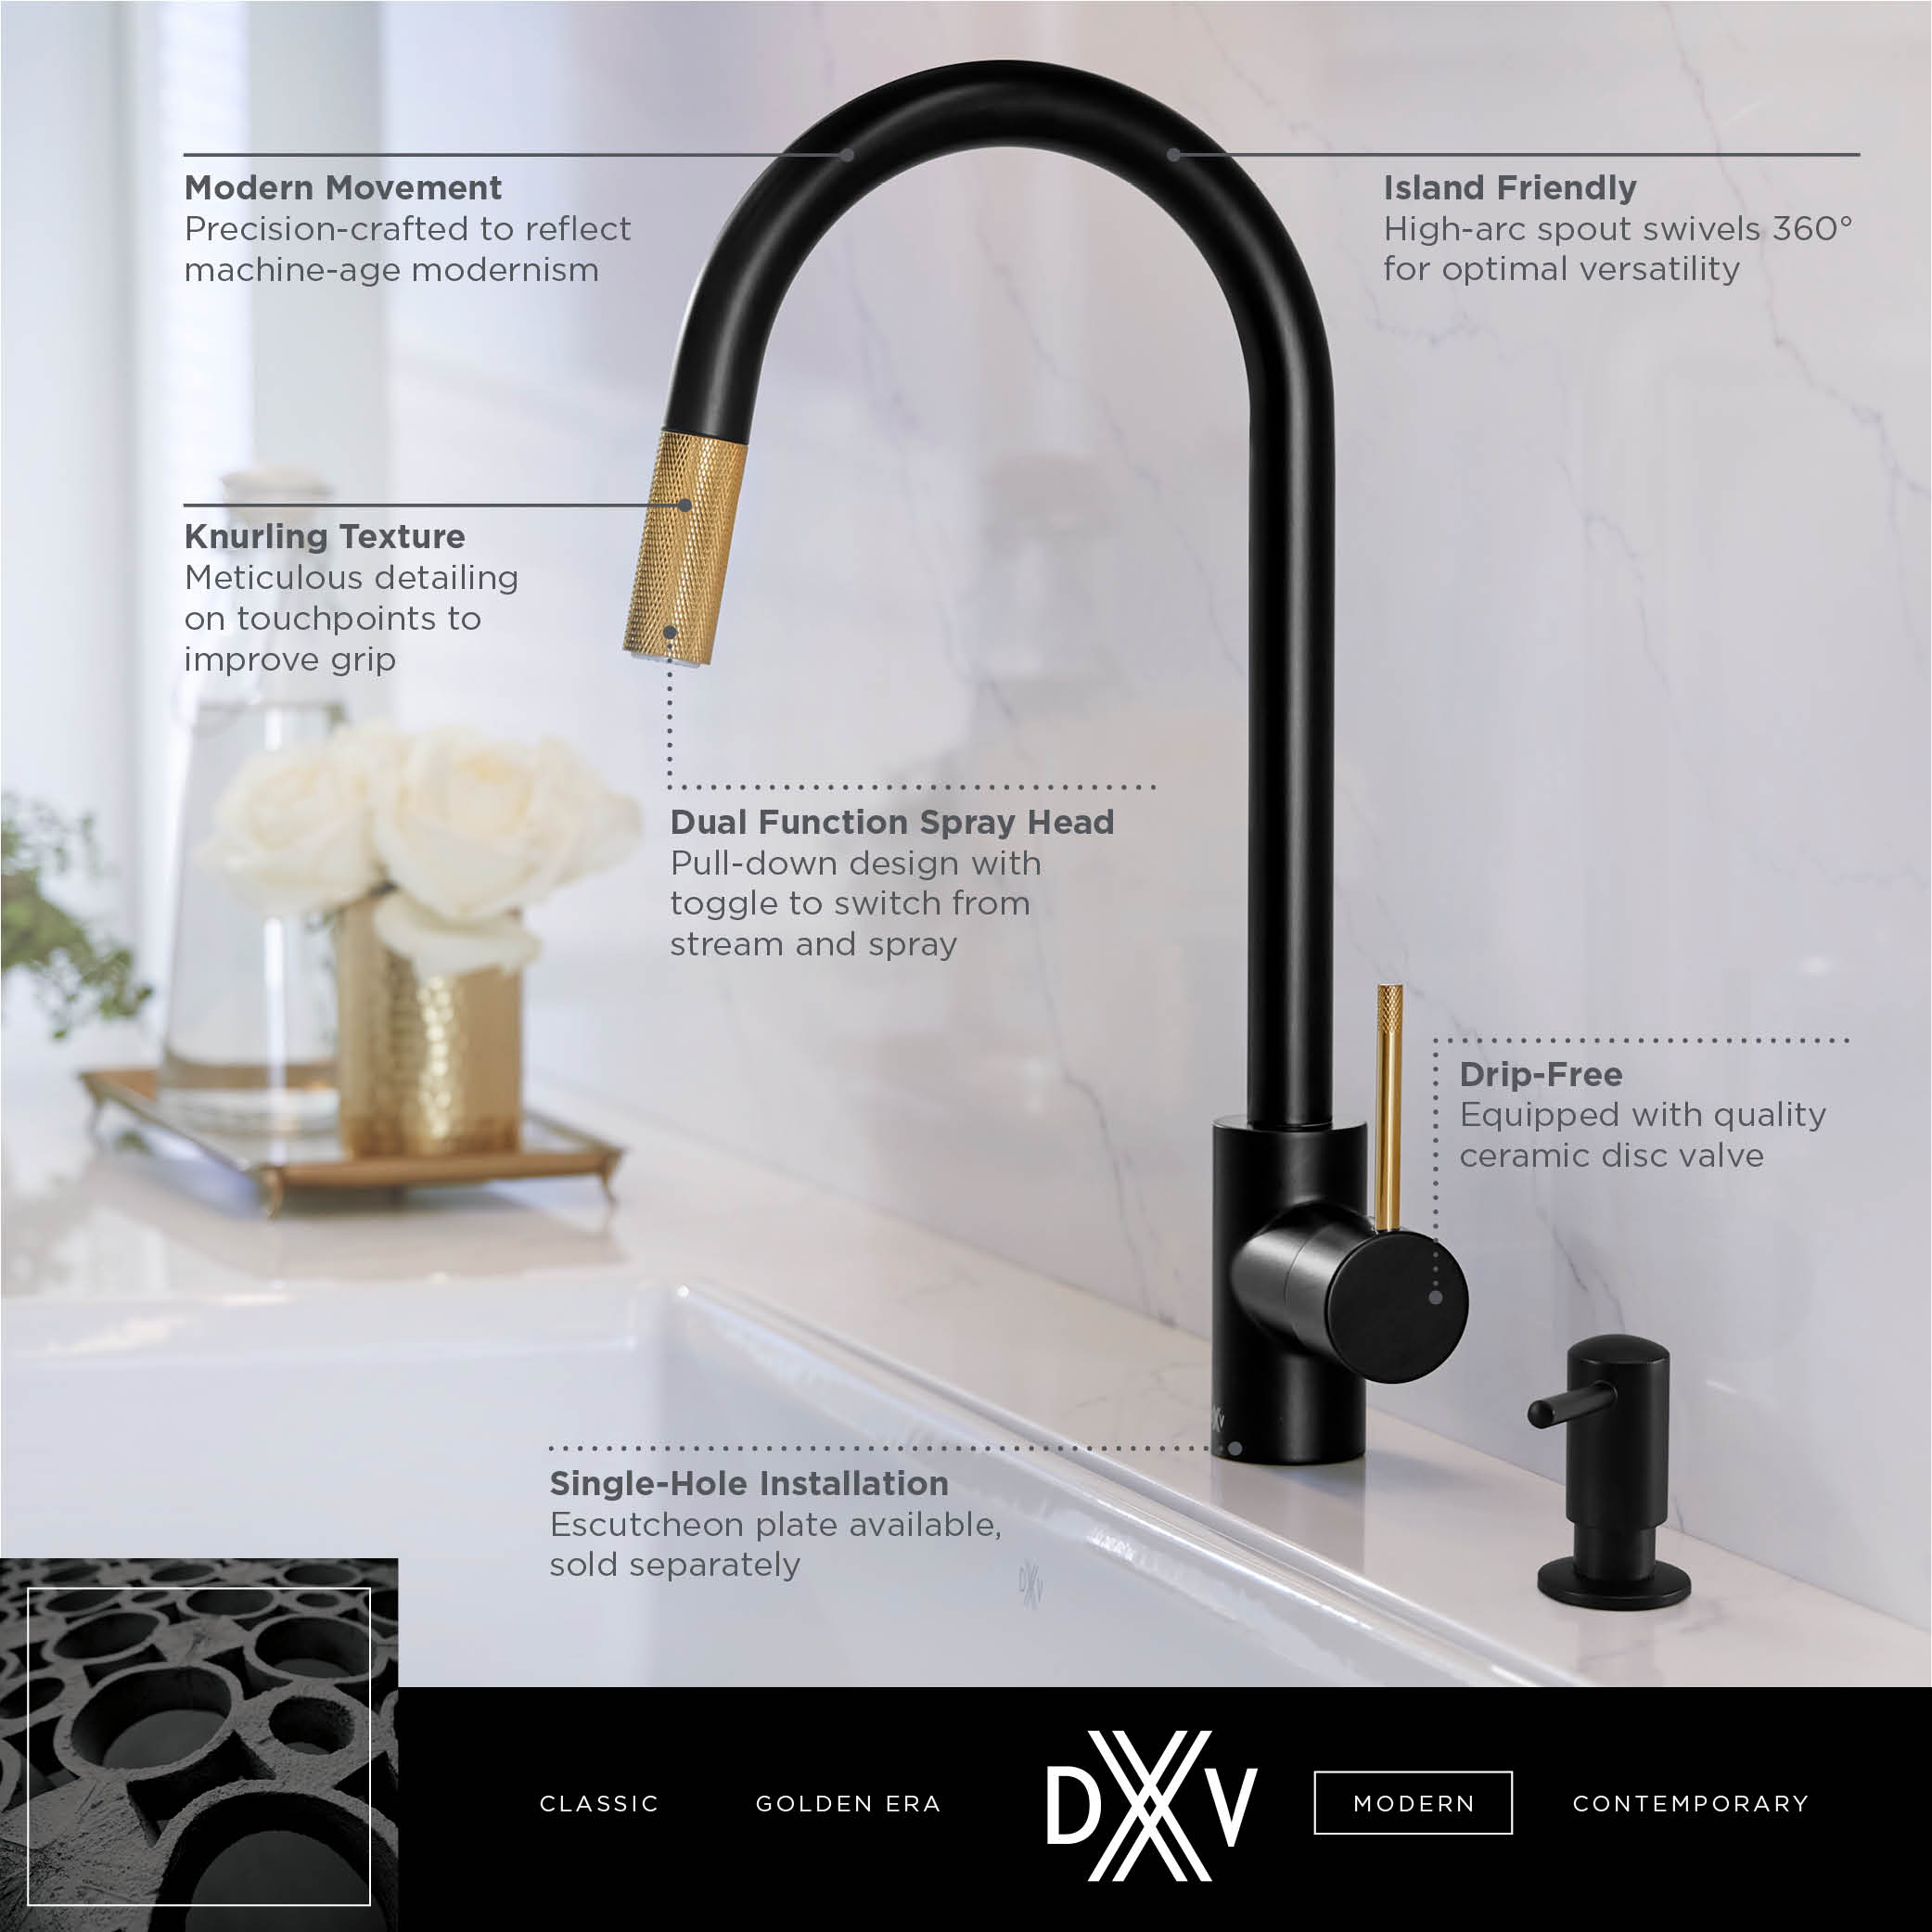 Etre™ Single Handle Pull-Down Kitchen Faucet with Lever Handle